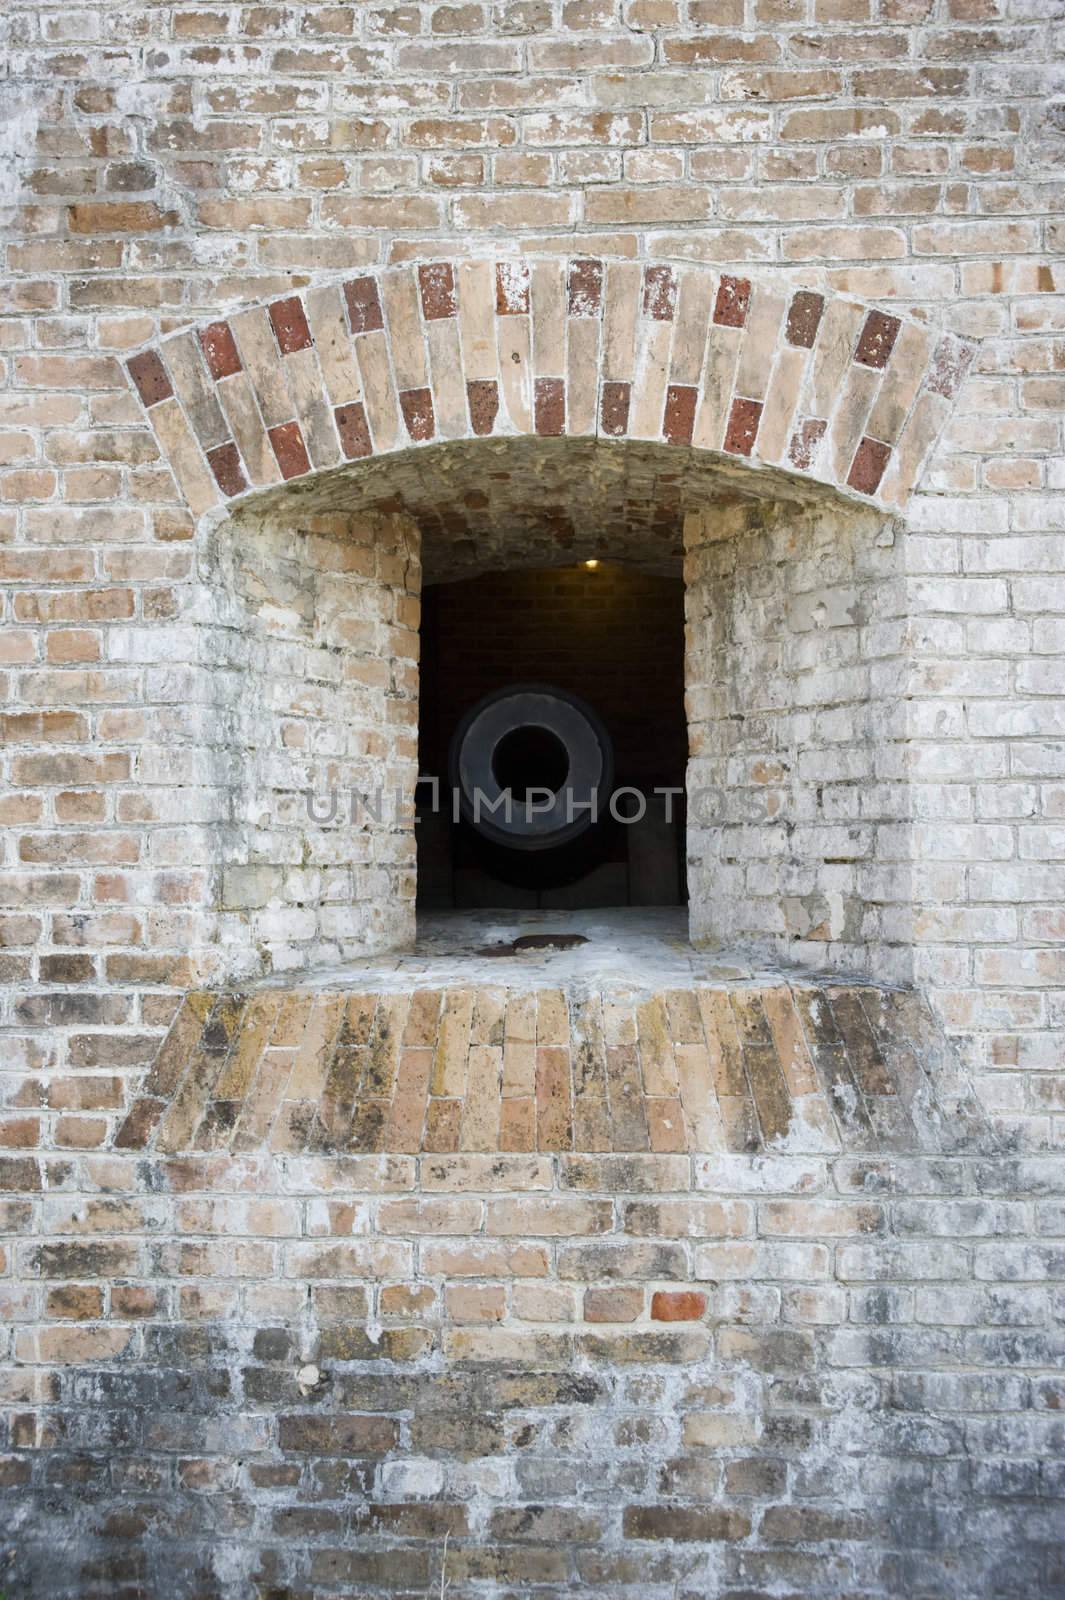 Cannon Embrasure Front by Naluphoto